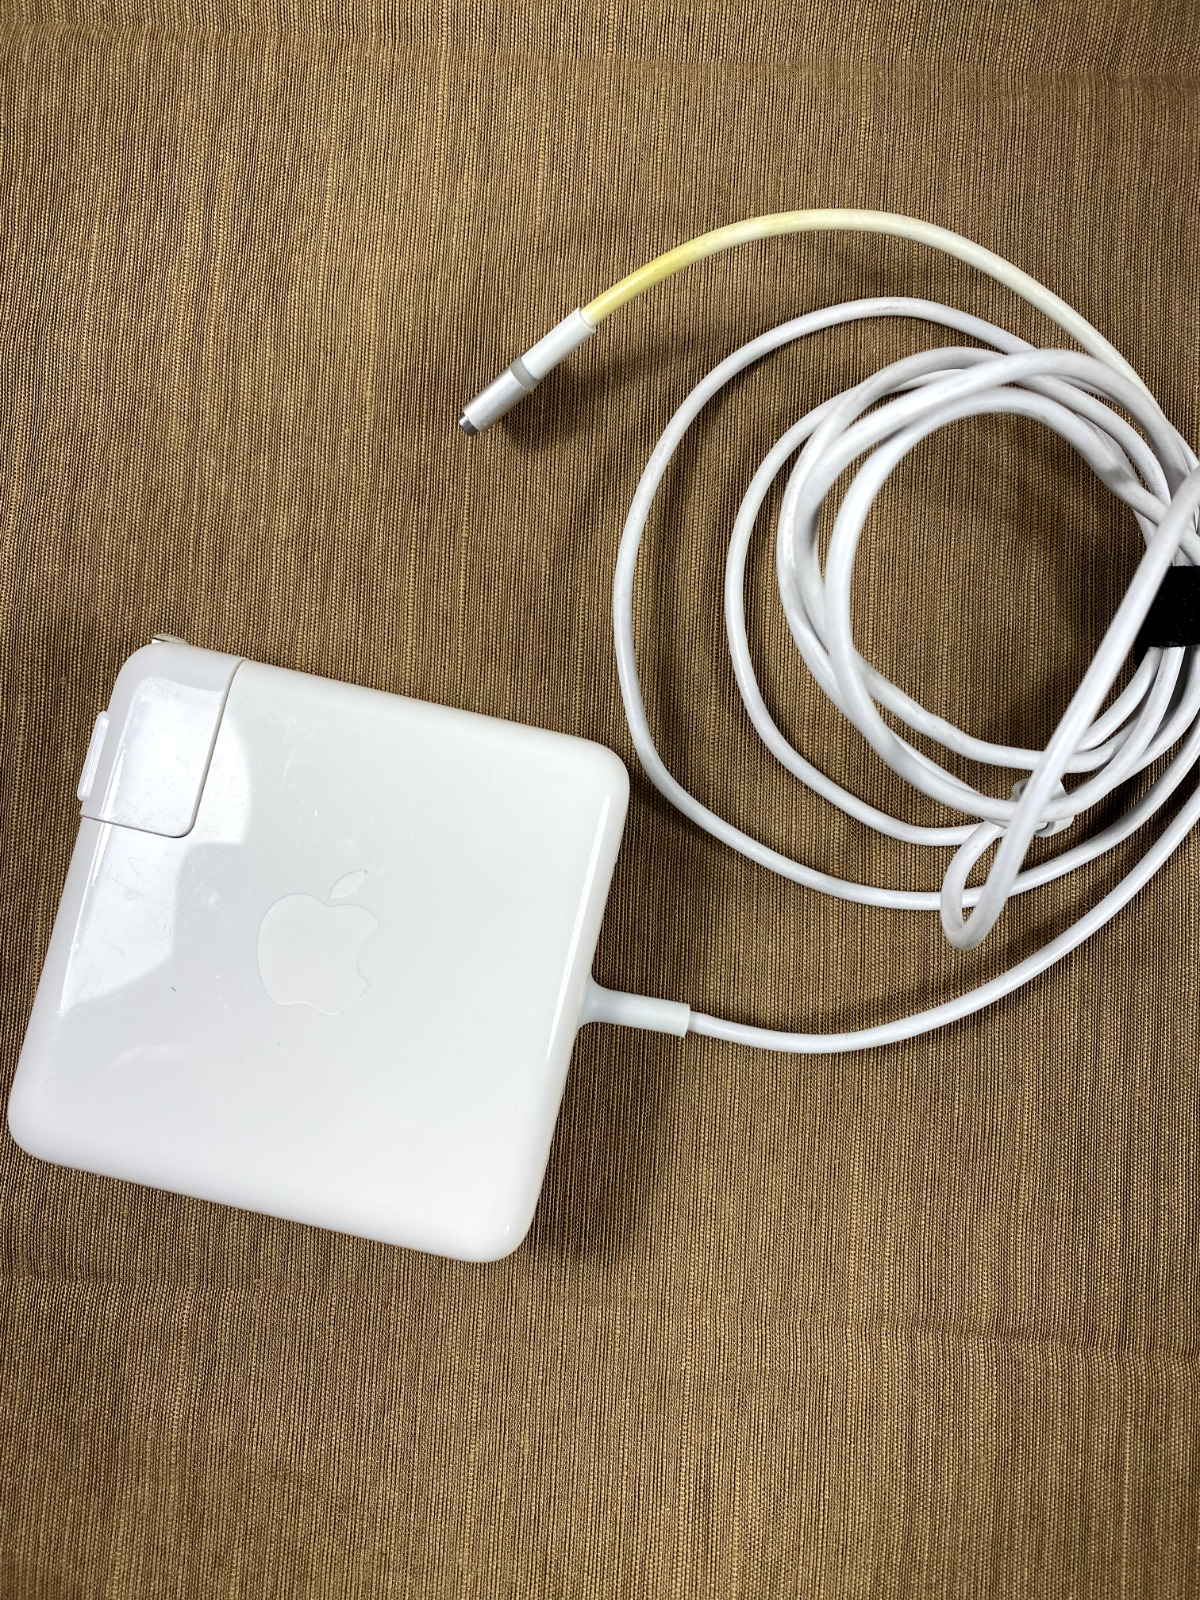 Apple  OEM 85W  Magsafe 1  Power Adapter Charger For MacBook Pro l Air